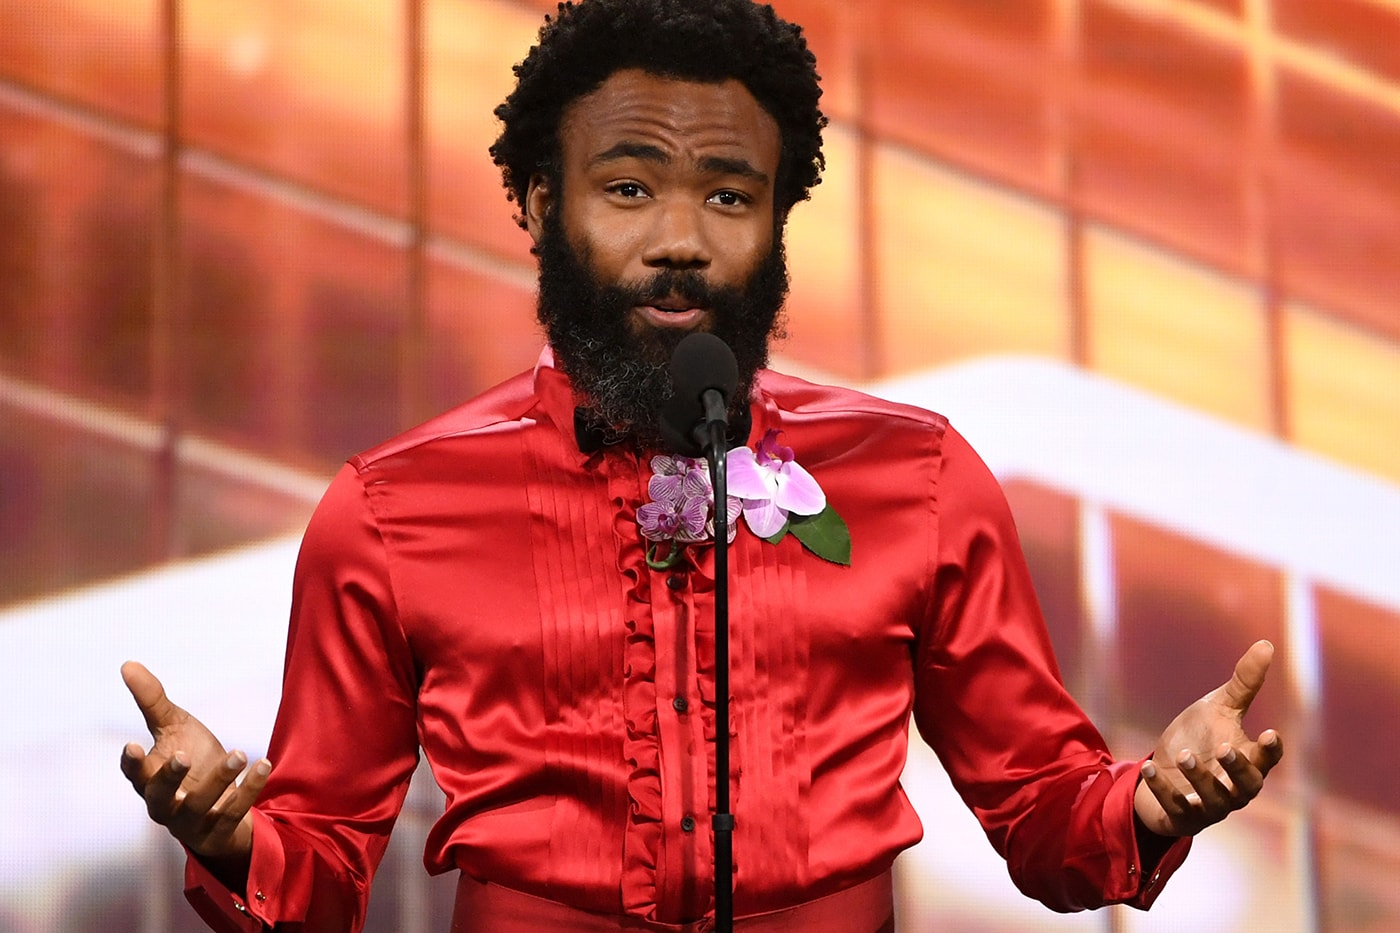 Childish Gambino on Why He Created Awaken My Love the shop interview lebron james hbo donald glover